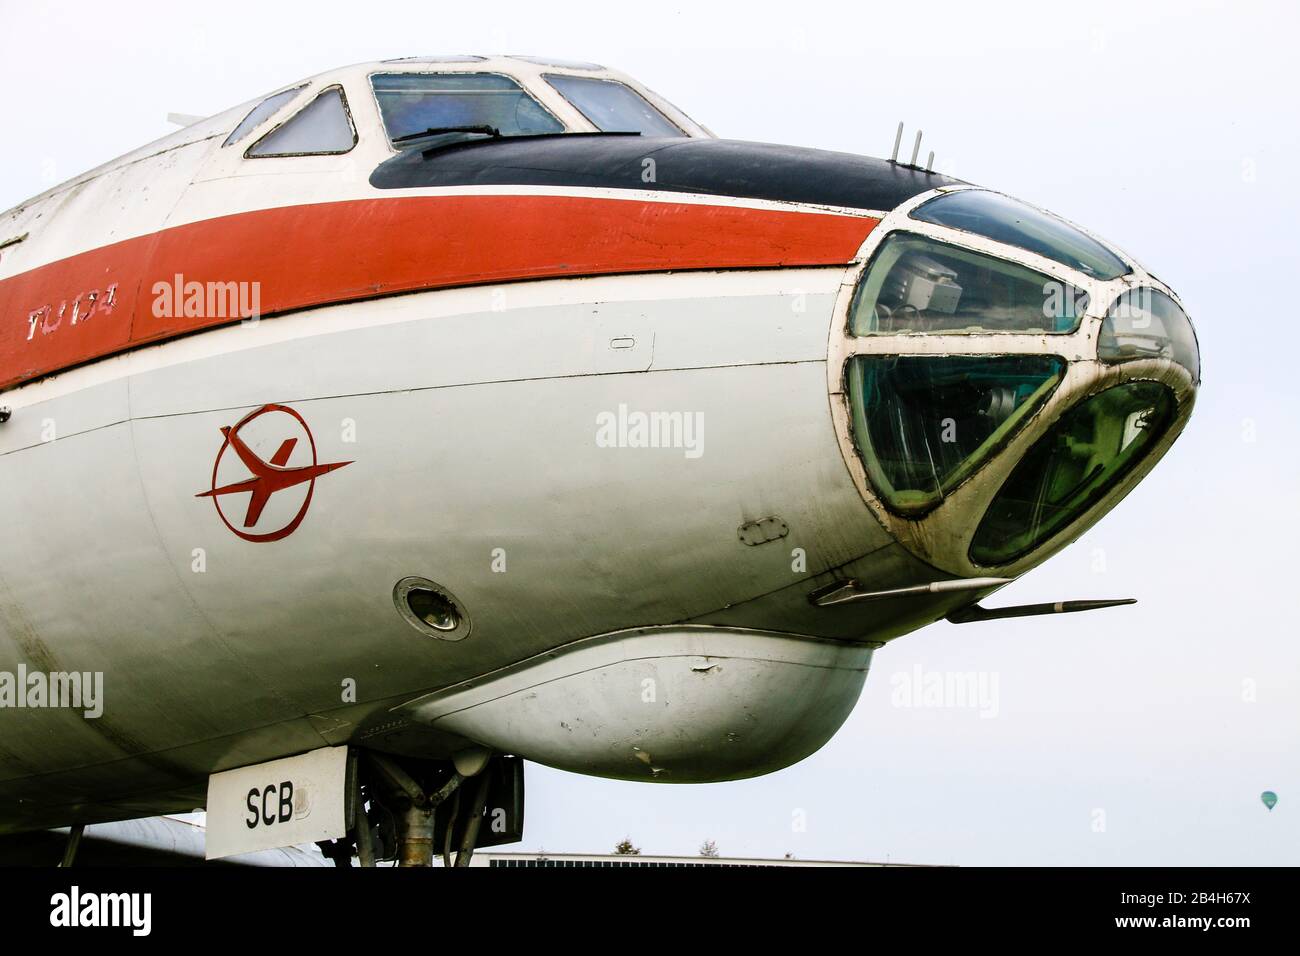 Interflug, airline of the GDR, Tupolew, Magdeburg, Saxony-Anhalt, Germany. Stock Photo